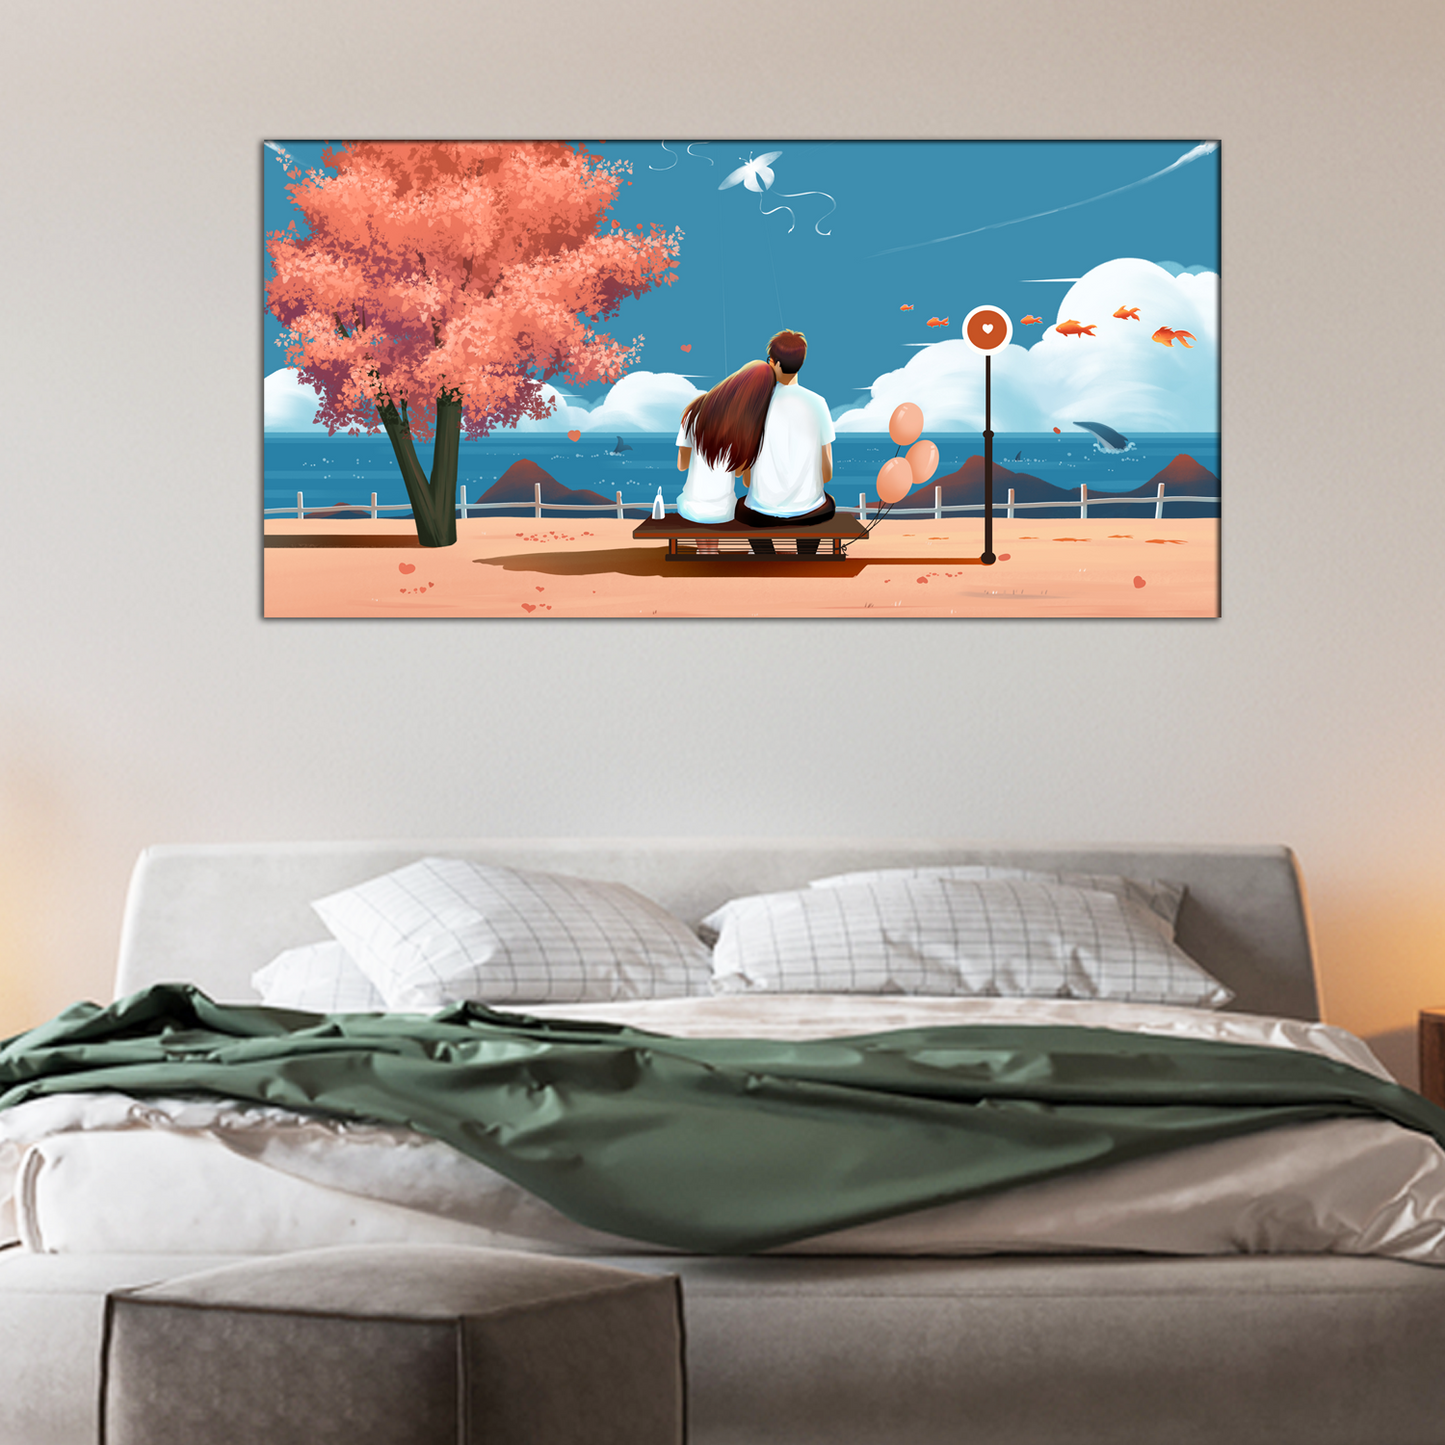 Couple Canvas Print Wall Painting